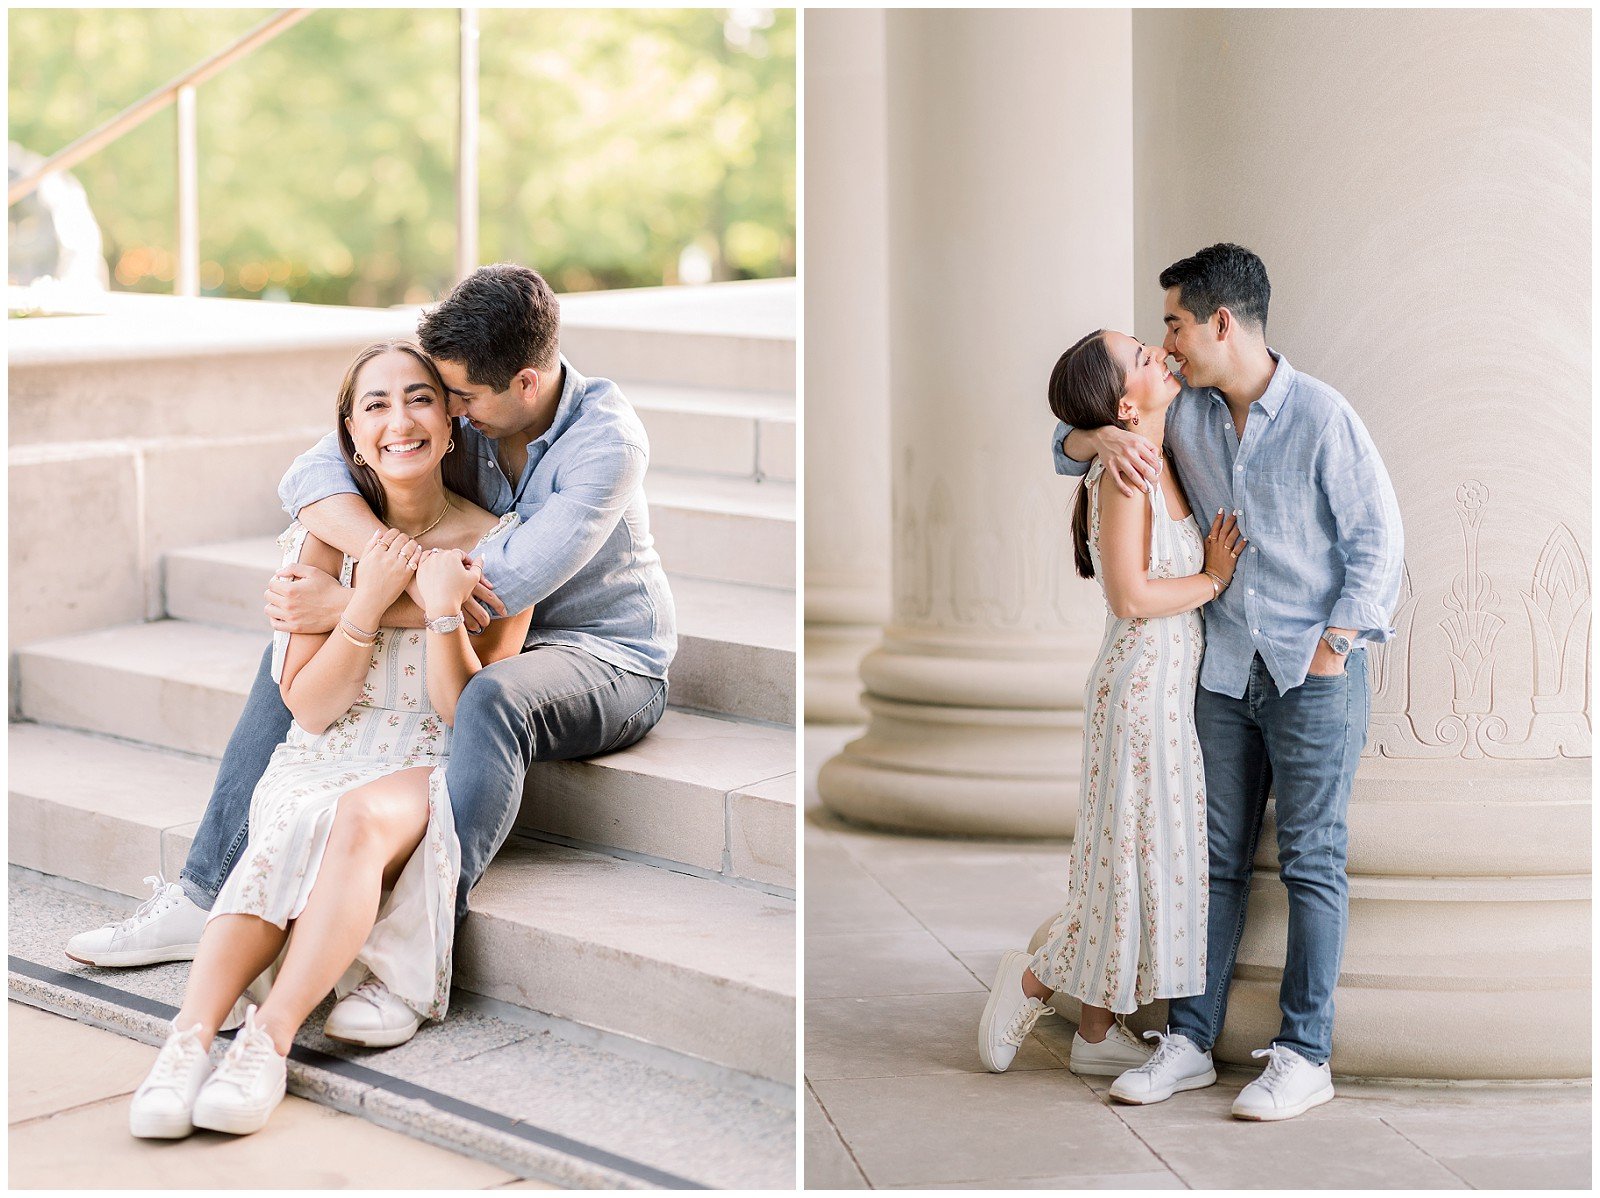 Summer-Engagement-Photos-at-The-Nelson-Atkins-K+S-0522-Elizabeth-Ladean-Photography-photo-_6489.jpg